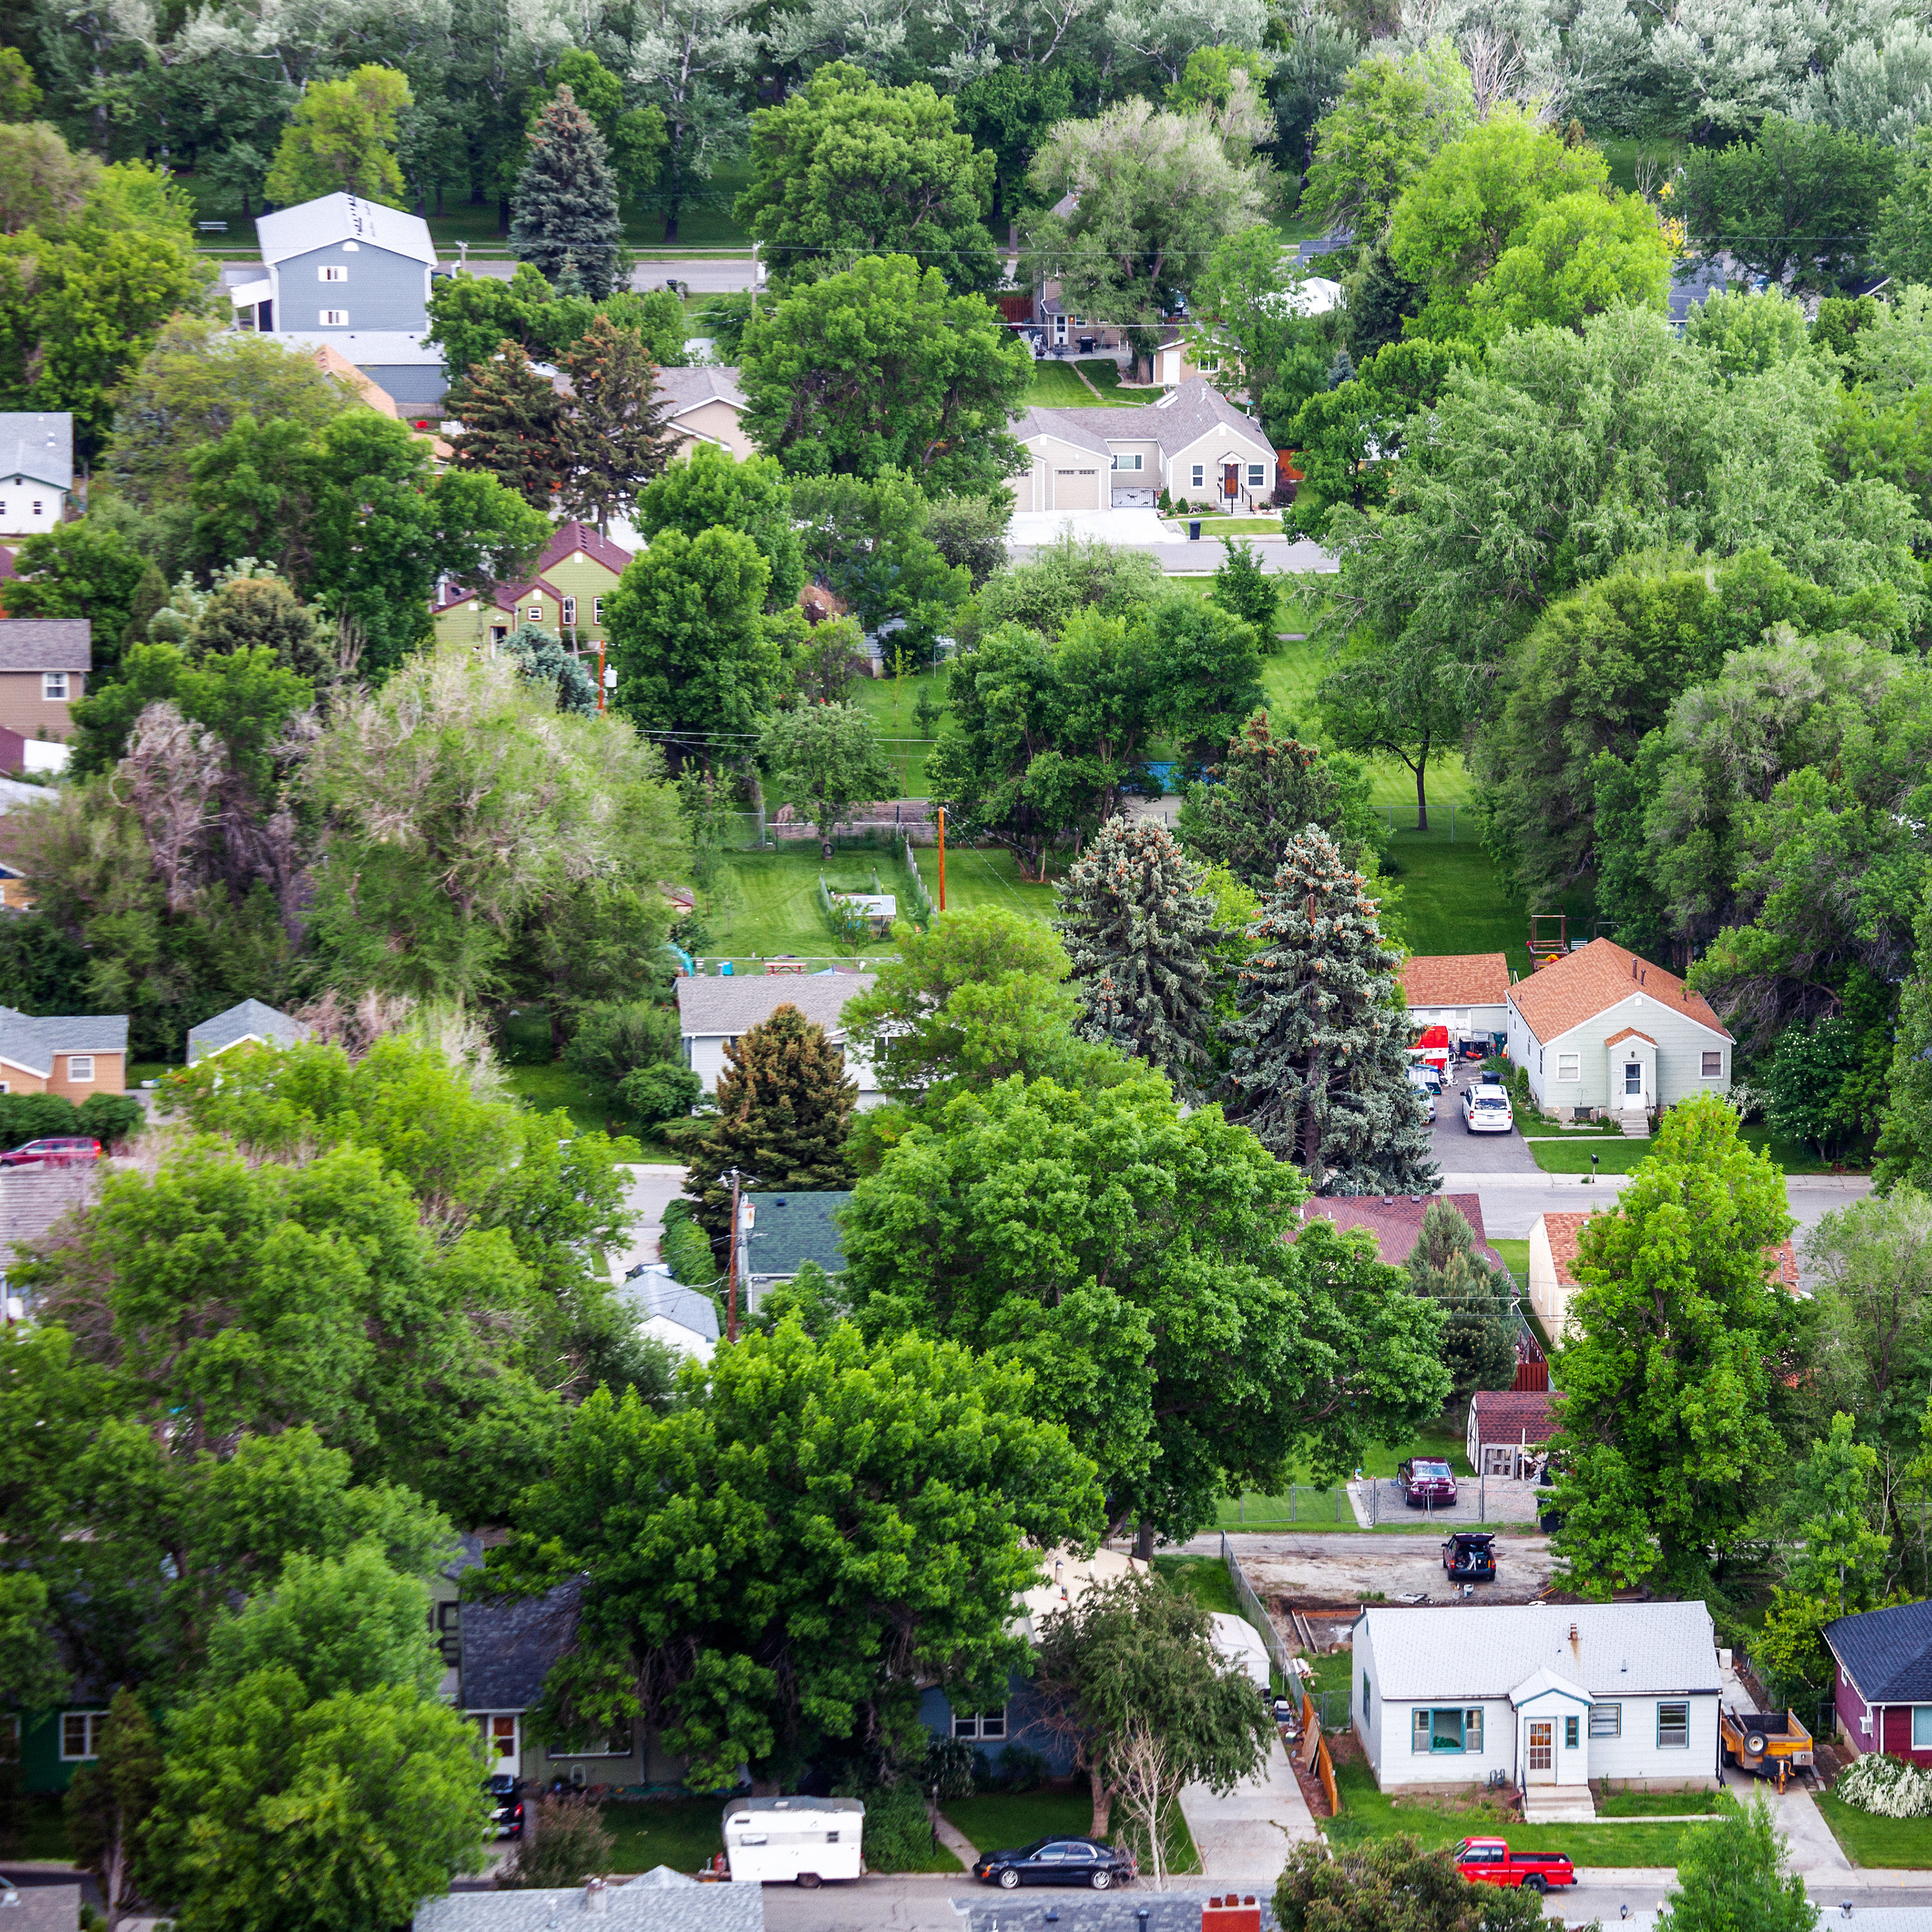 Homes in residential district. Billings, Montana, USA